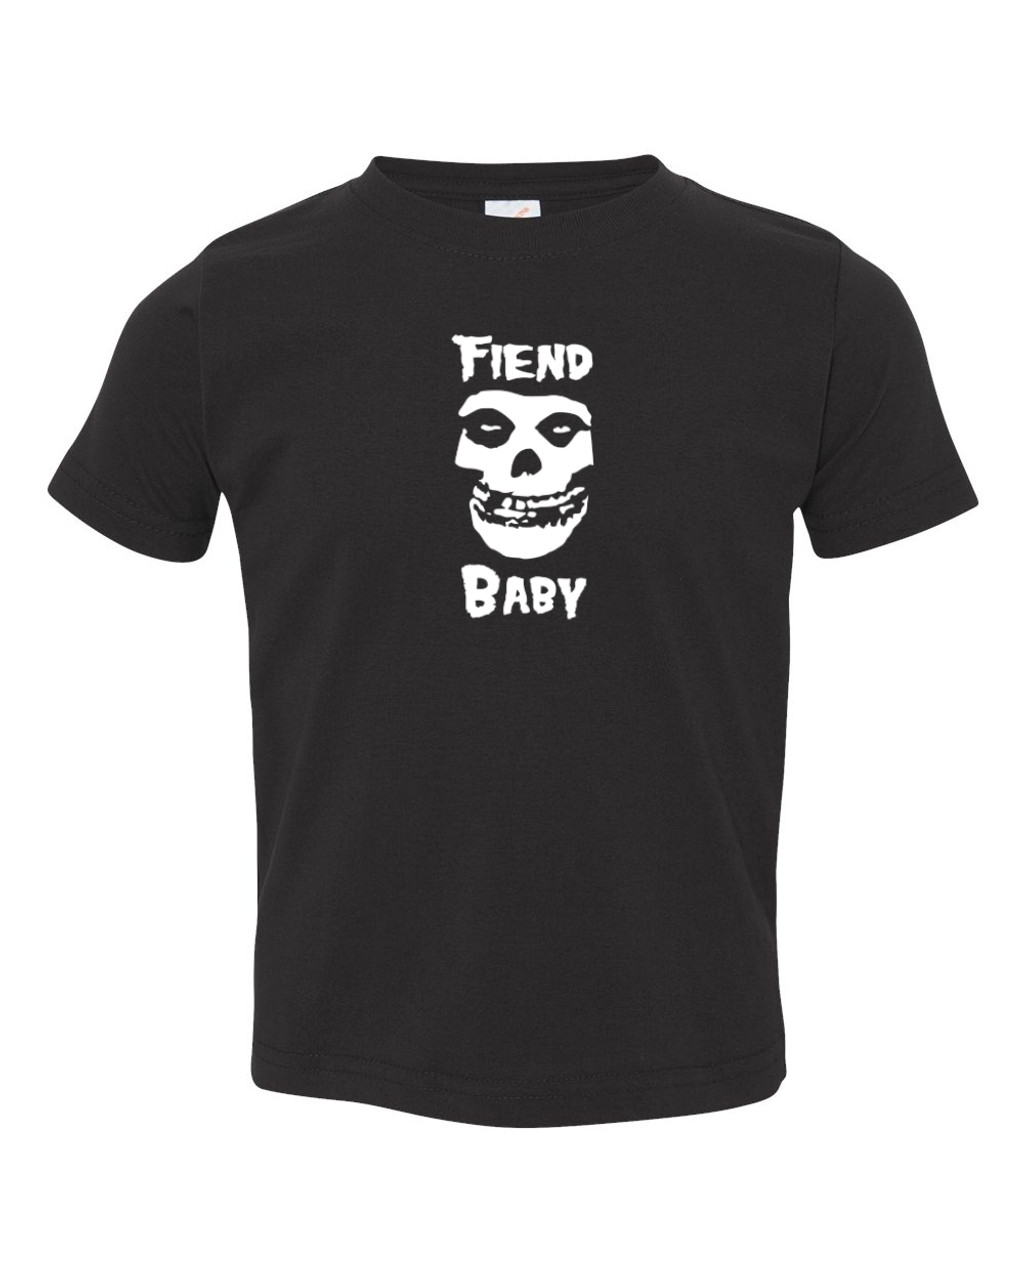 Misfits Fiend Club Infant Baby Toddler Punk Rock T-shirt Danzig Years